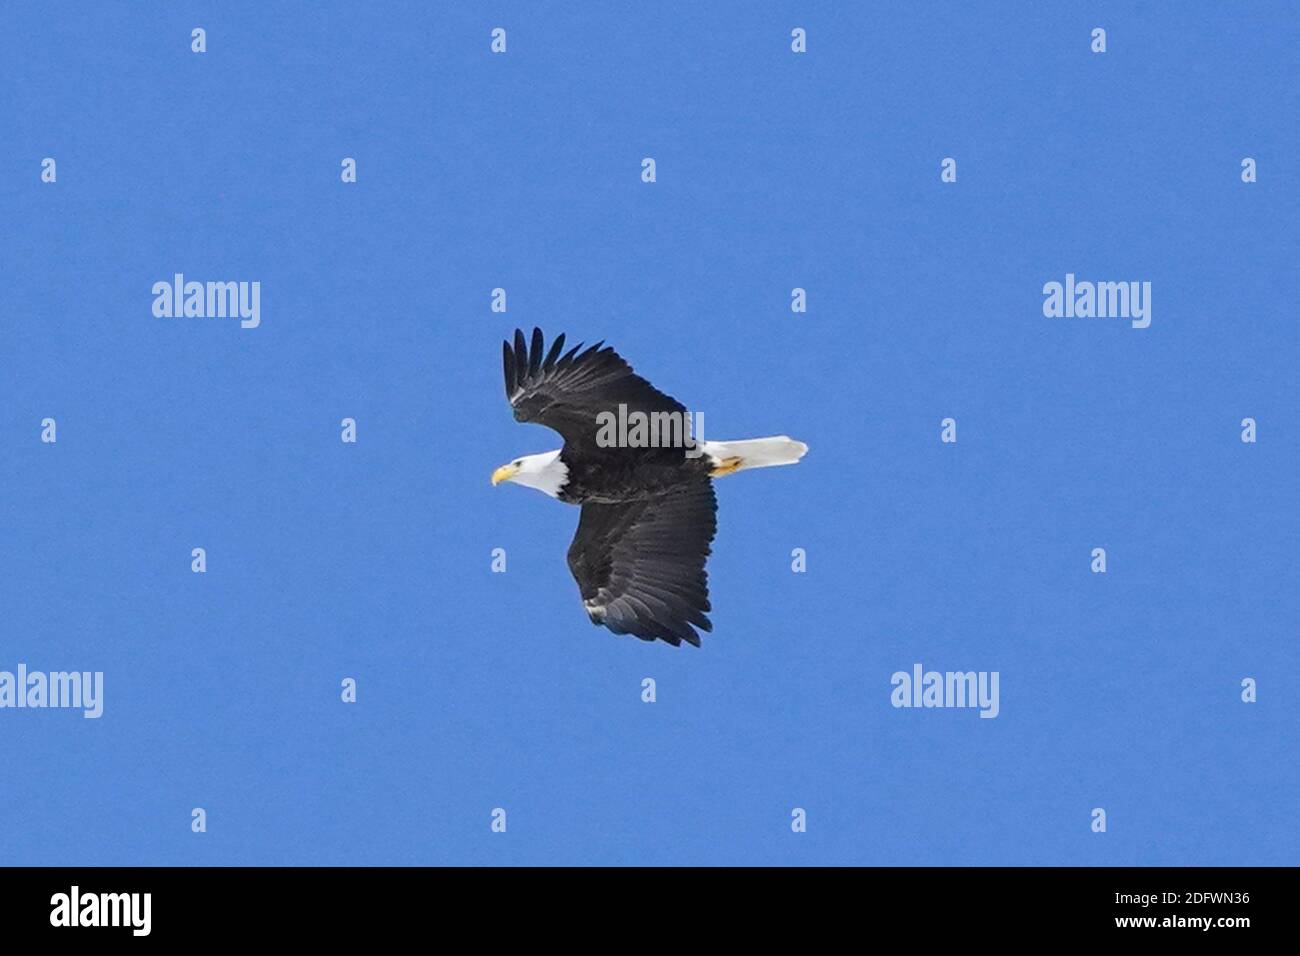 Wild Bald eagle flying in winter sky Stock Photo